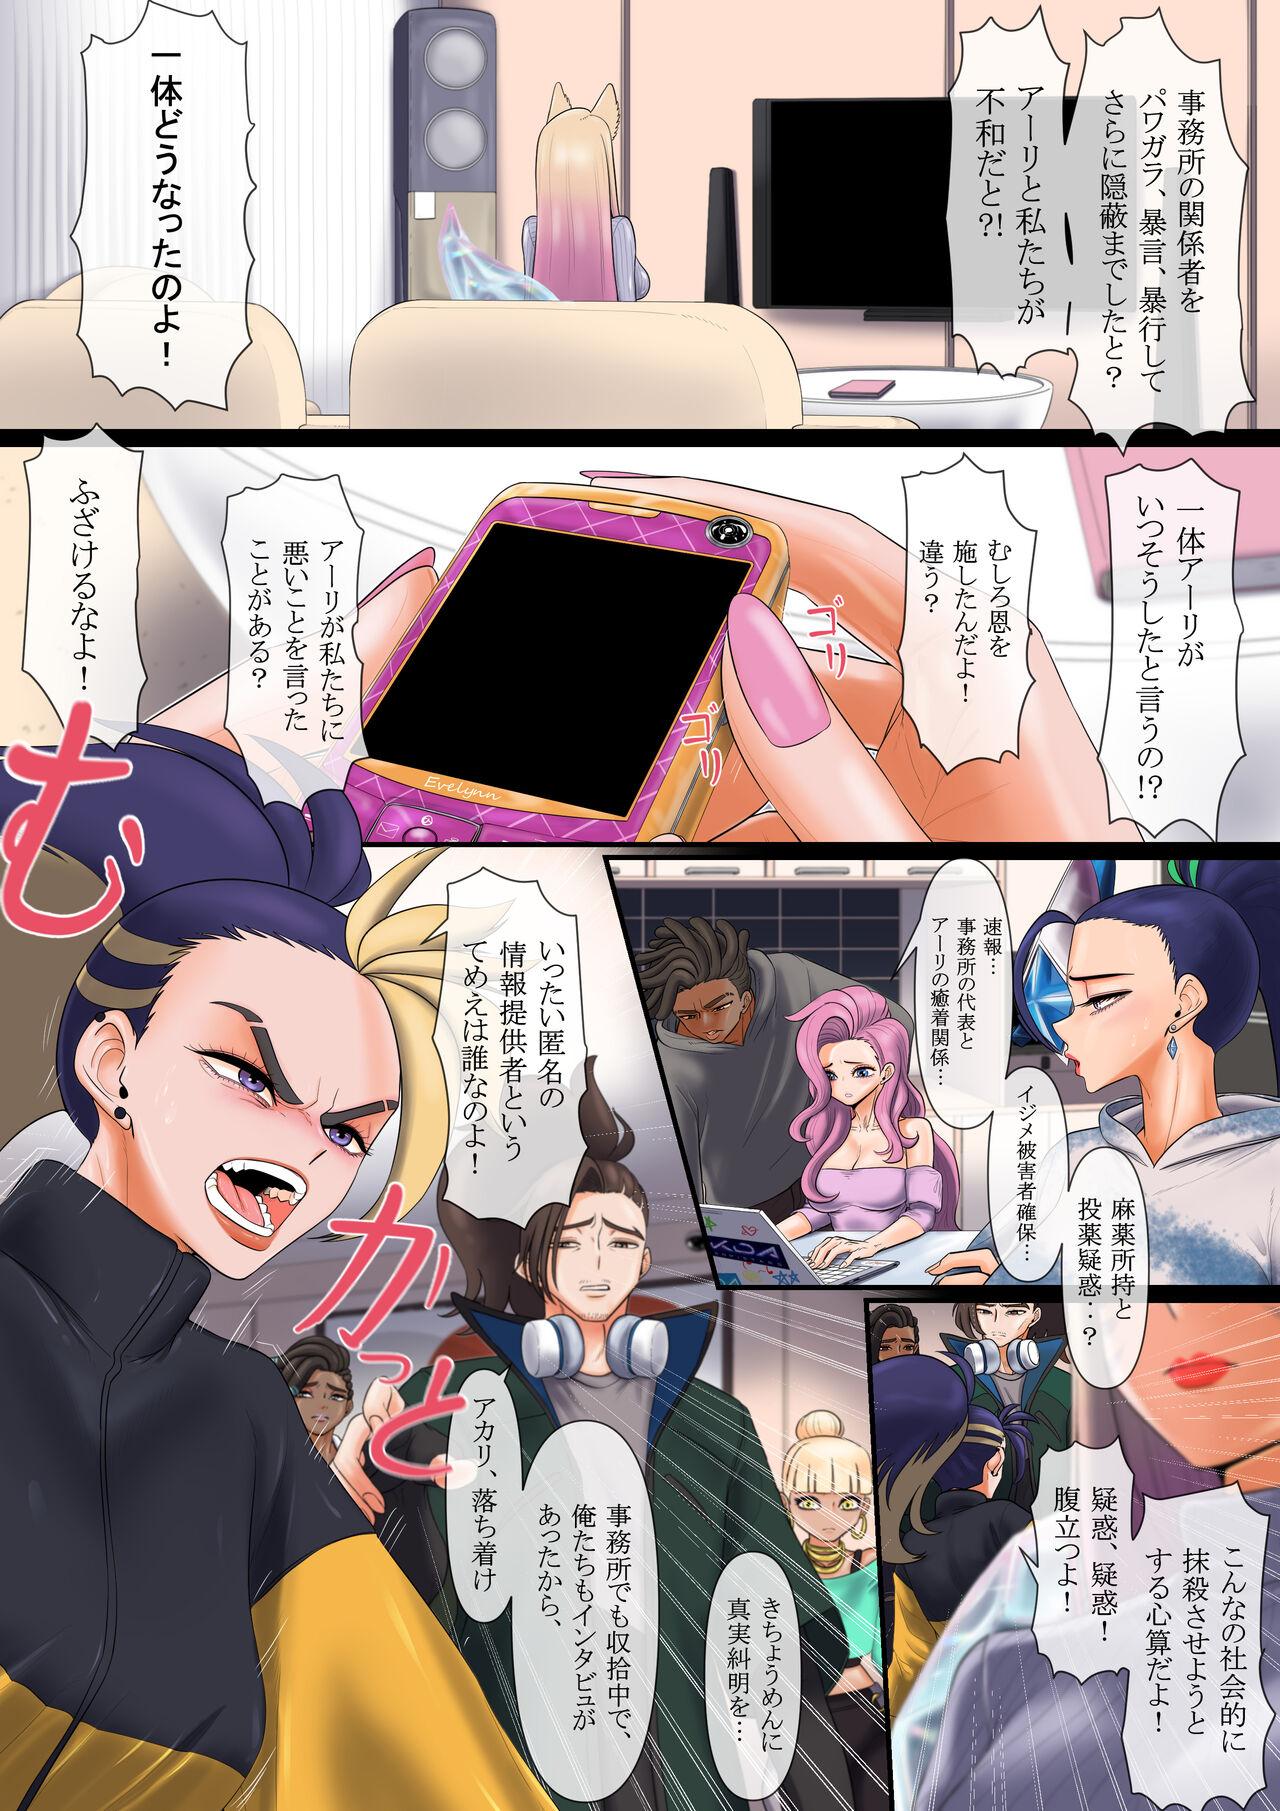 Pussyfucking 守りたいもの... - League of legends Made - Page 2